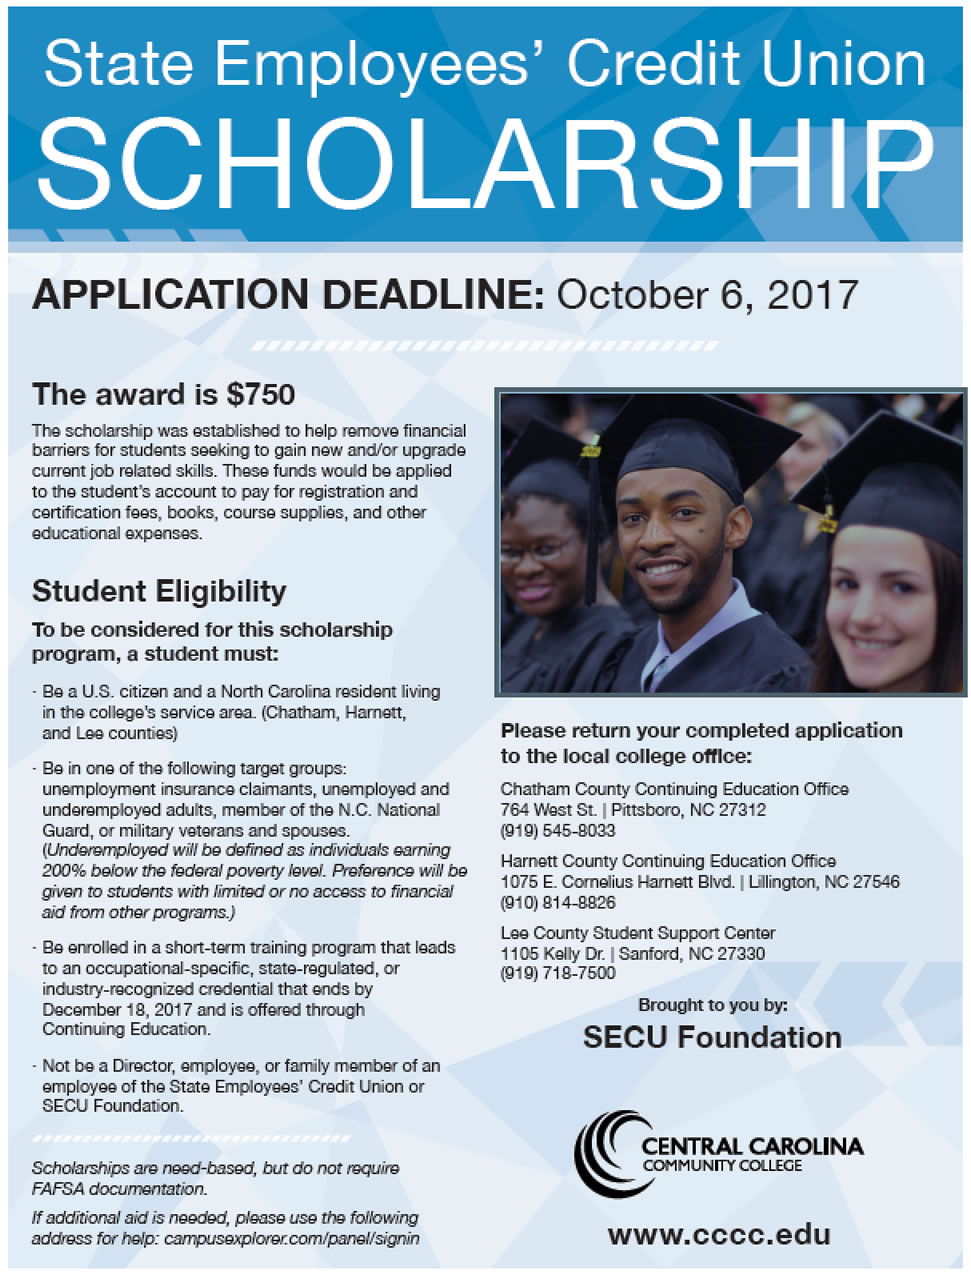 CCCC joins SECU for scholarship opportunity